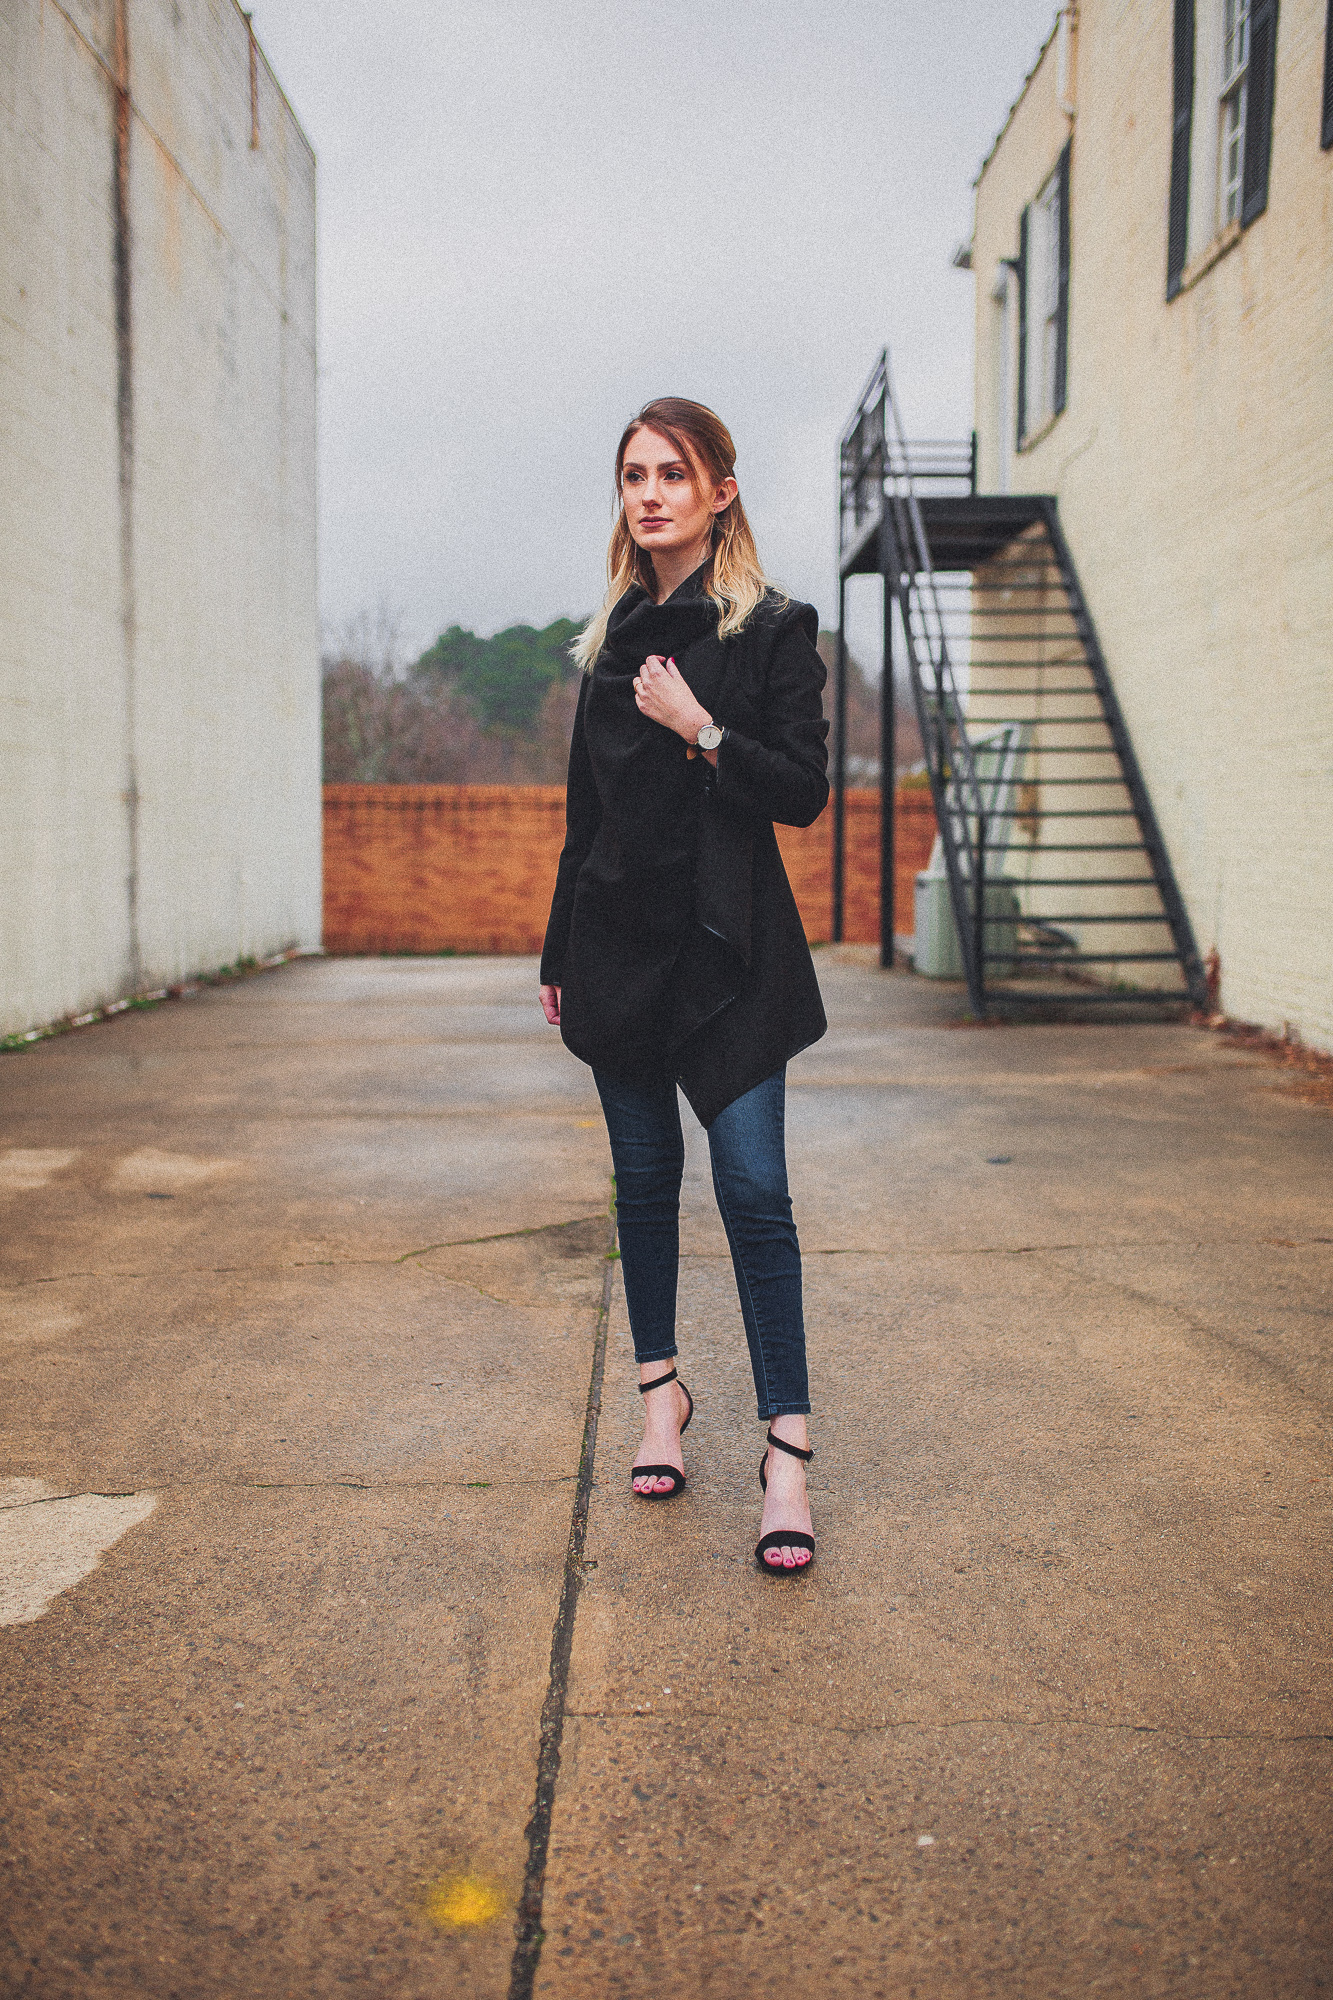 North Carolina fashion and lifestyle blogger Jessica Linn from Linn Style wearing a Welly Merck watch with a black draped coat, dark denim jeans from Target, and black faux suede strappy heels from ASOS. Photography by Joel Pagan taken in Downtown Cary NC